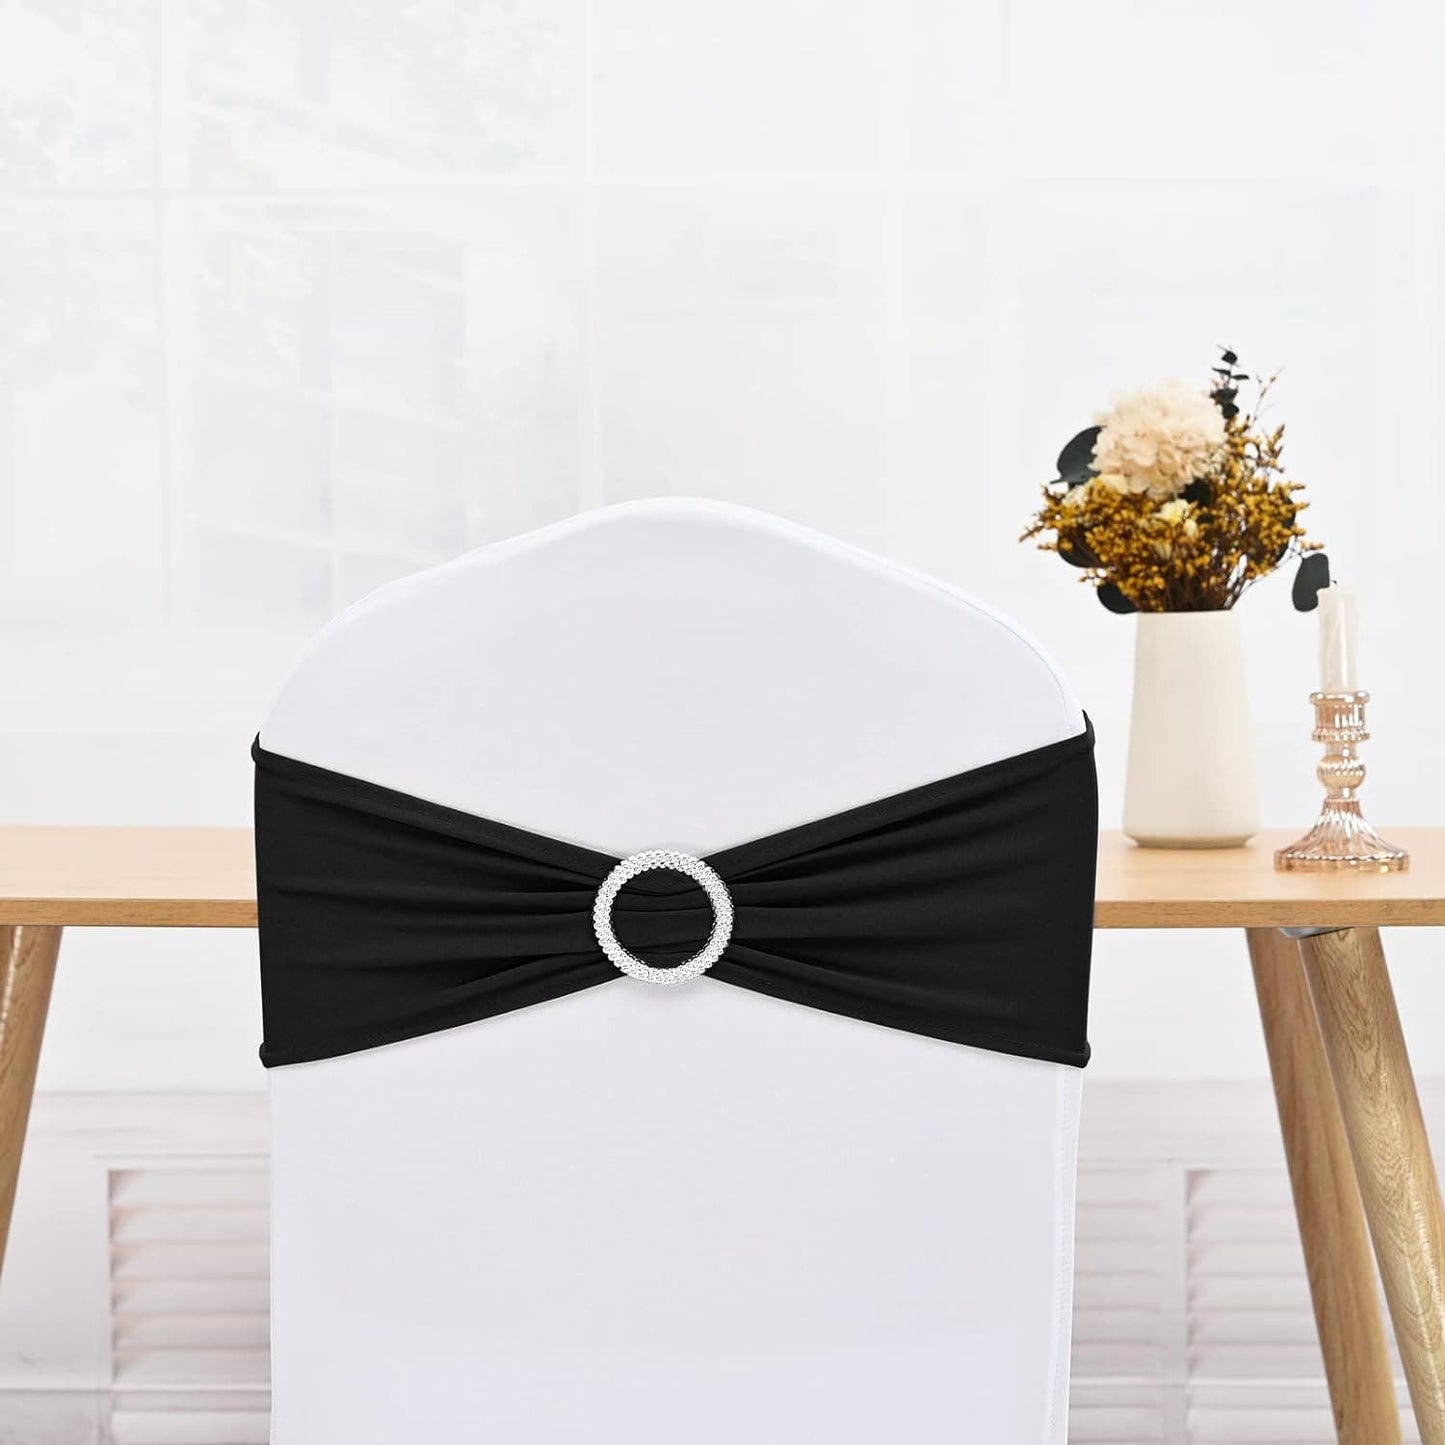 Pack of 60 Spandex Chair Sashes